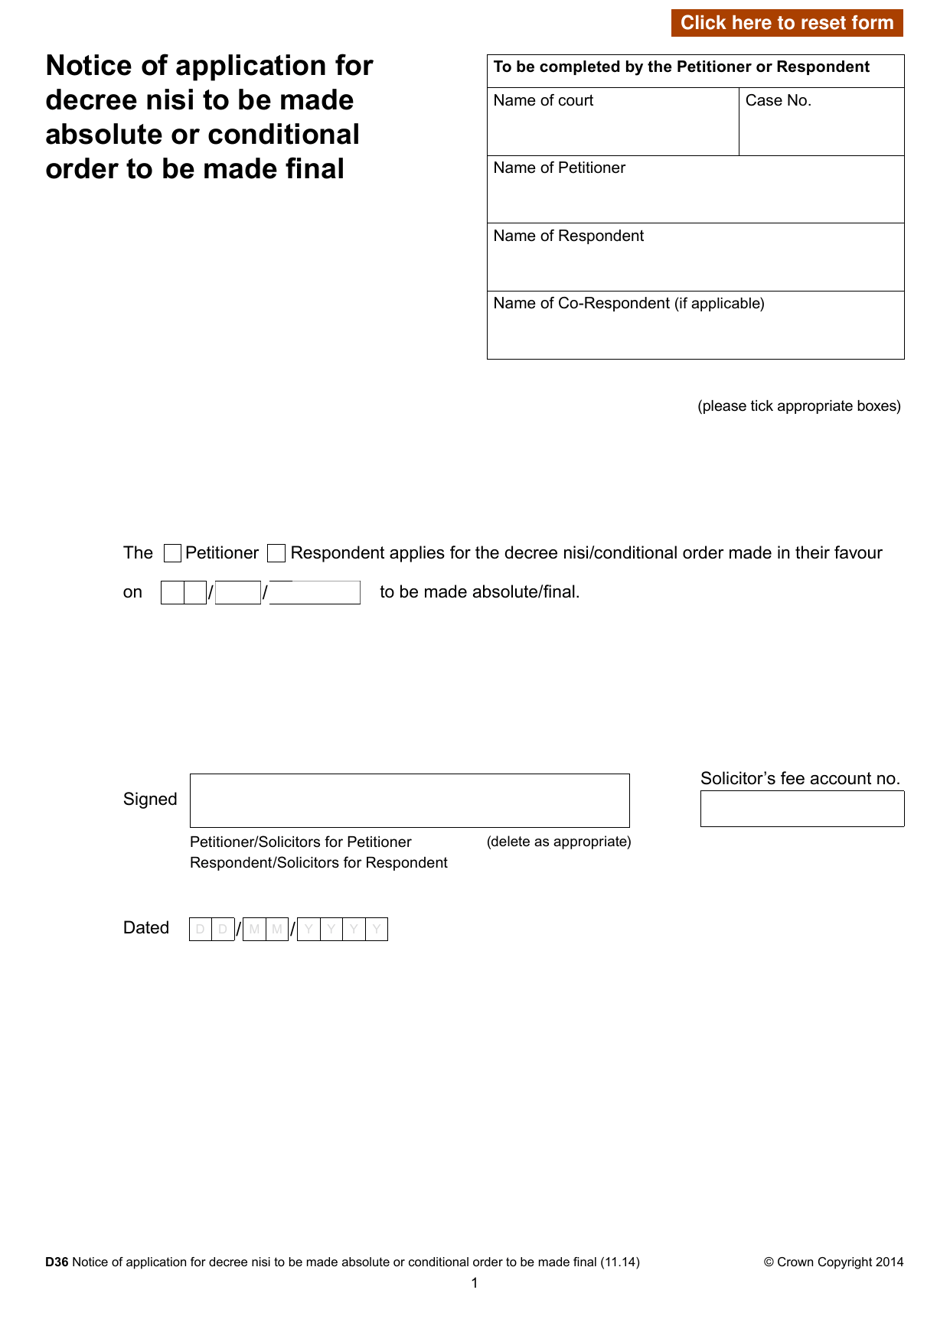 Form D36 Notice of Application for Decree Nisi to Be Made Absolute or Conditional Order to Be Made Final - United Kingdom, Page 1